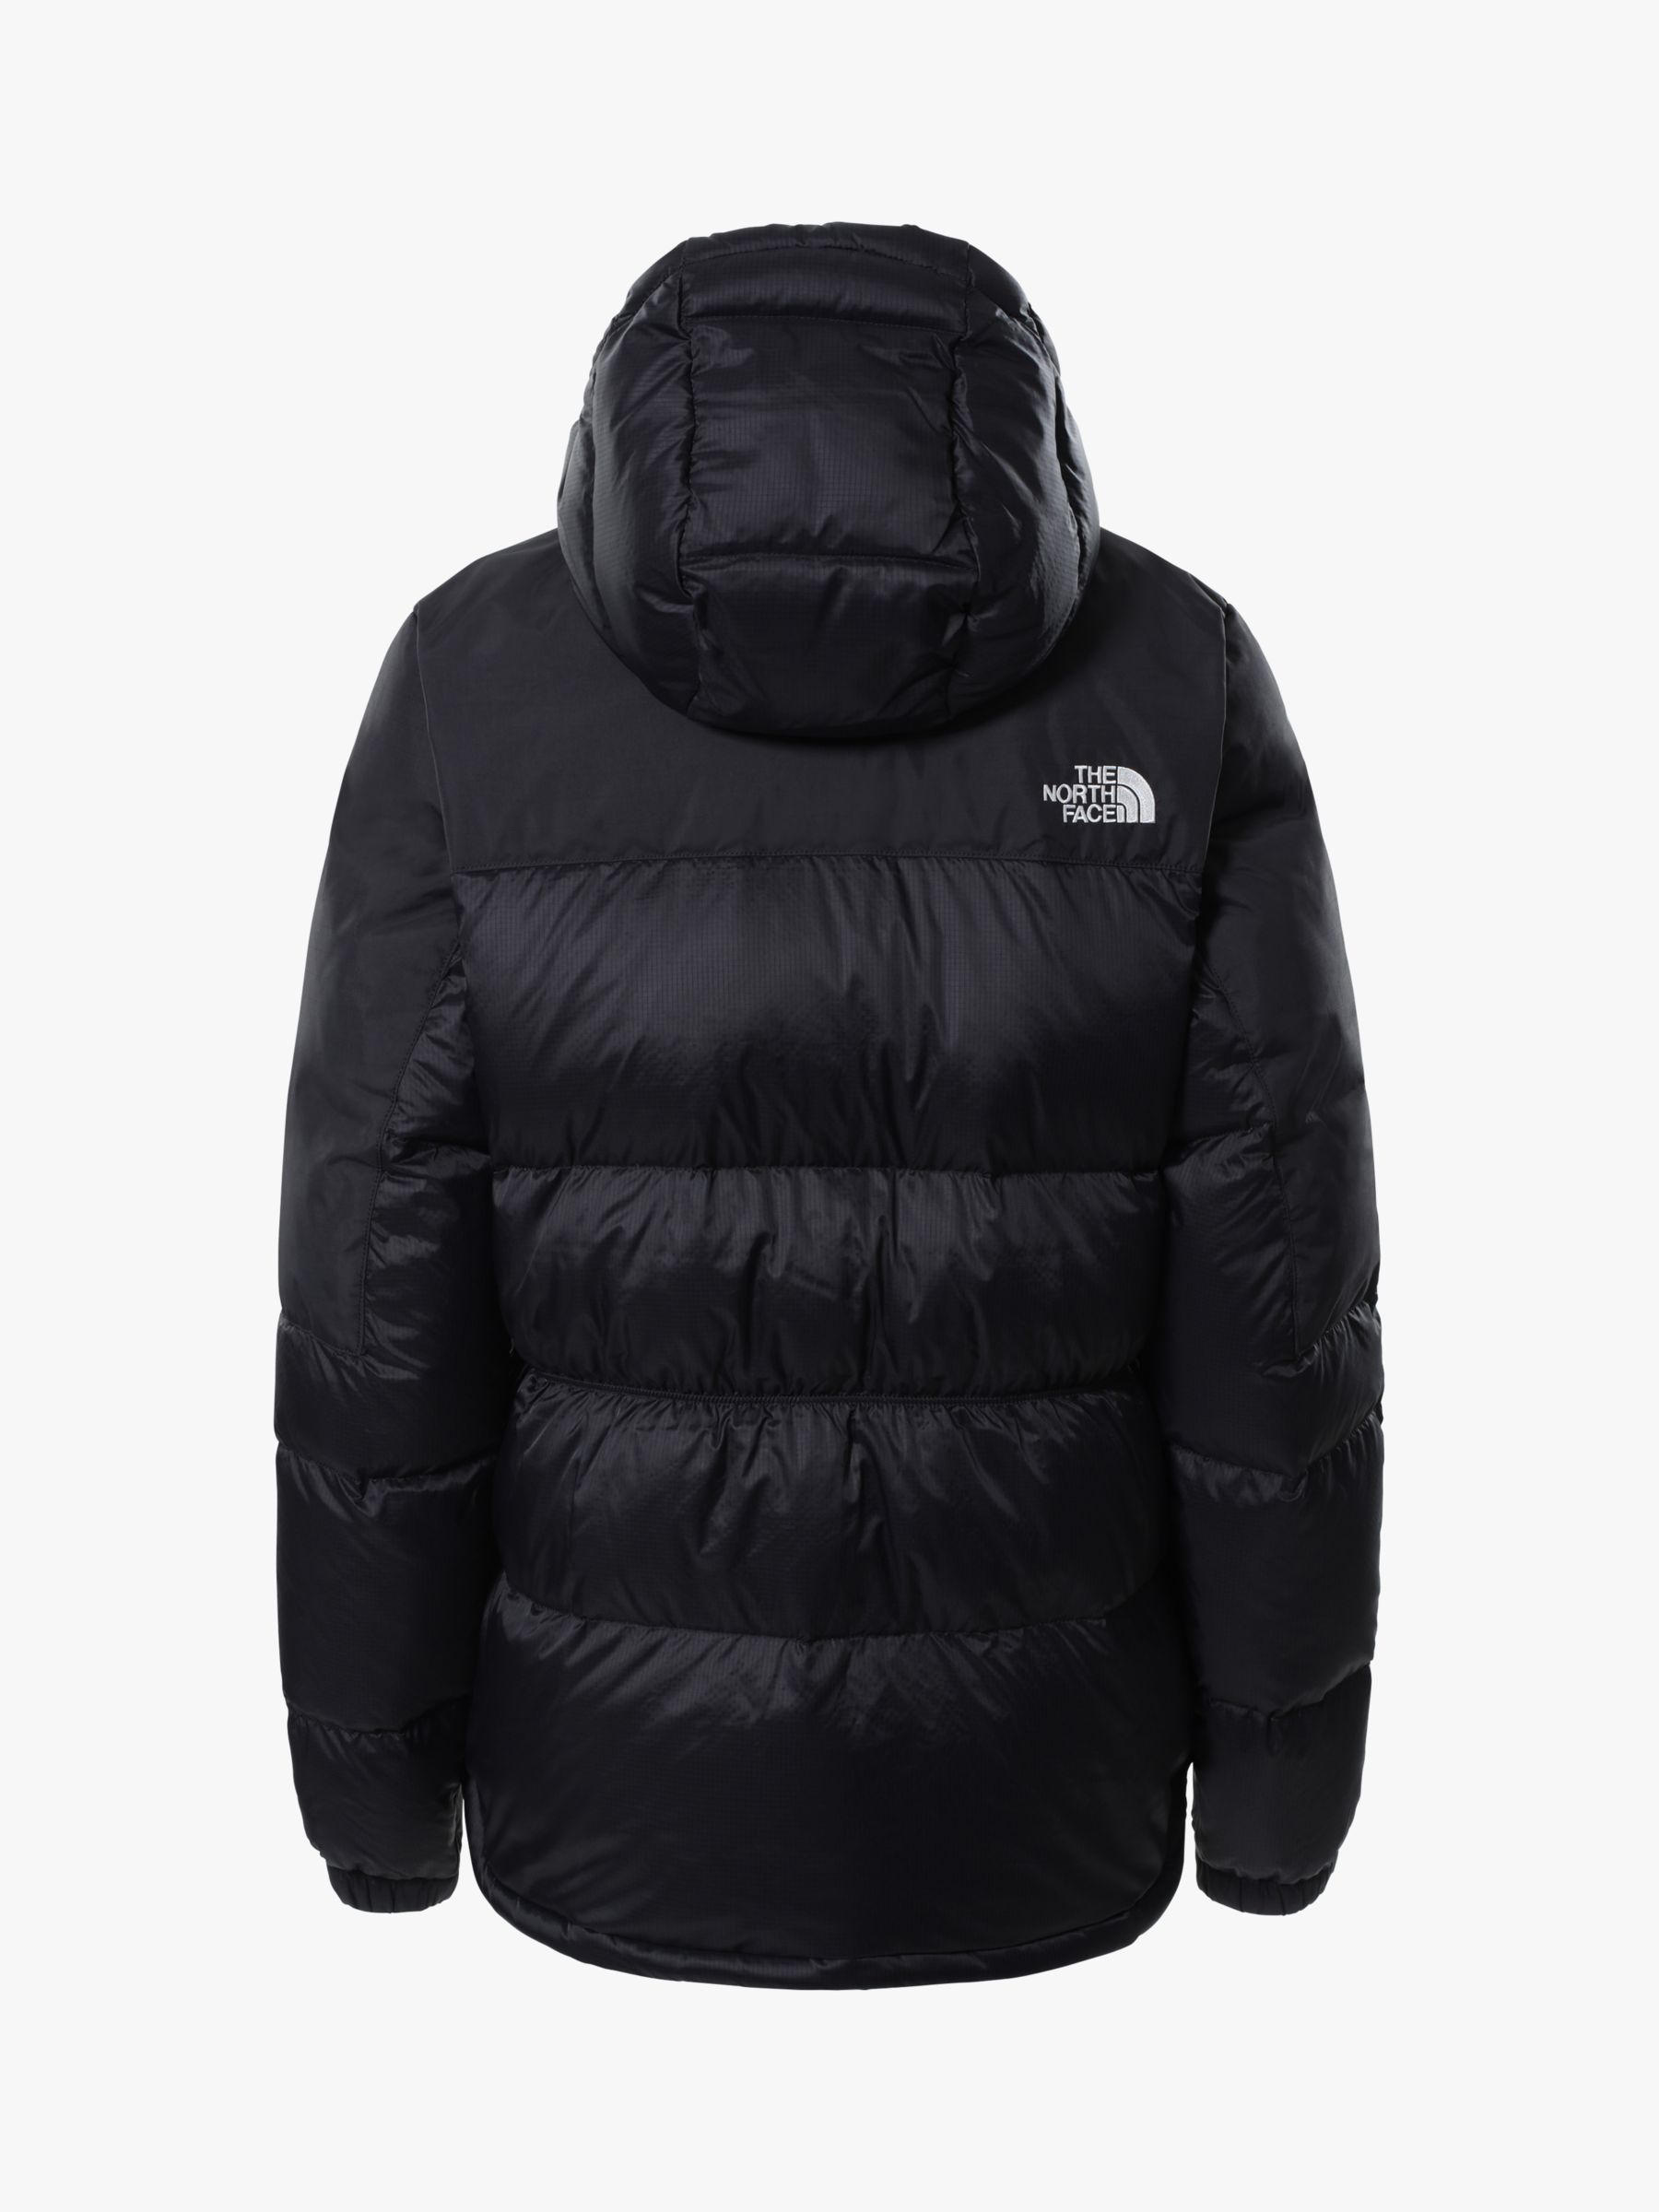 The North Face Diablo Down Women's Hooded Jacket